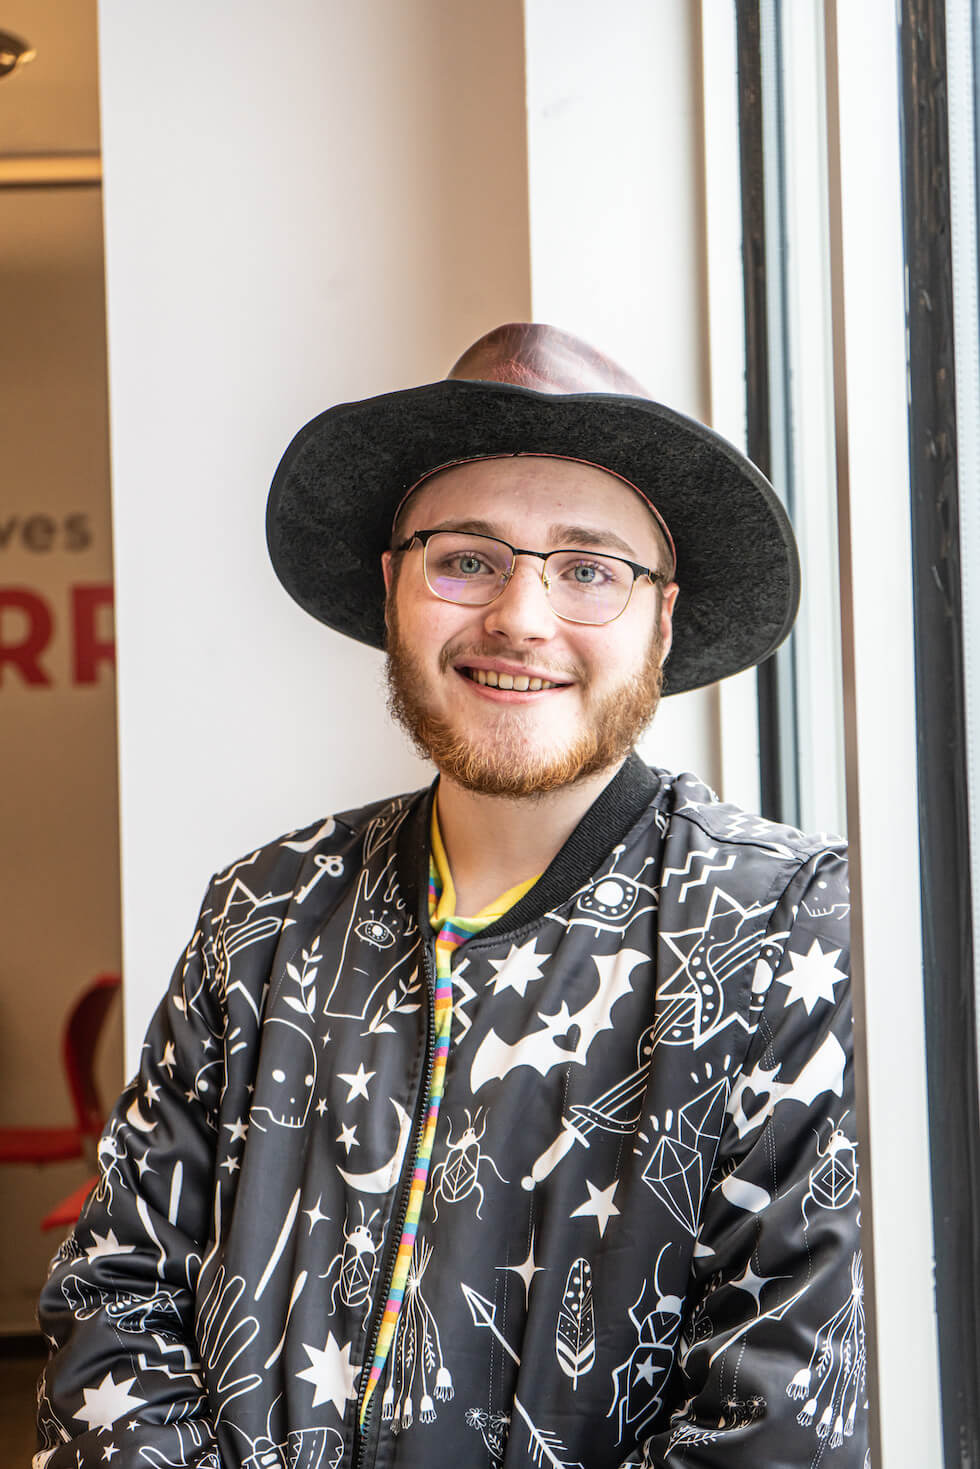 Person wearing a leather hat and graphic patterned jacket smiling.